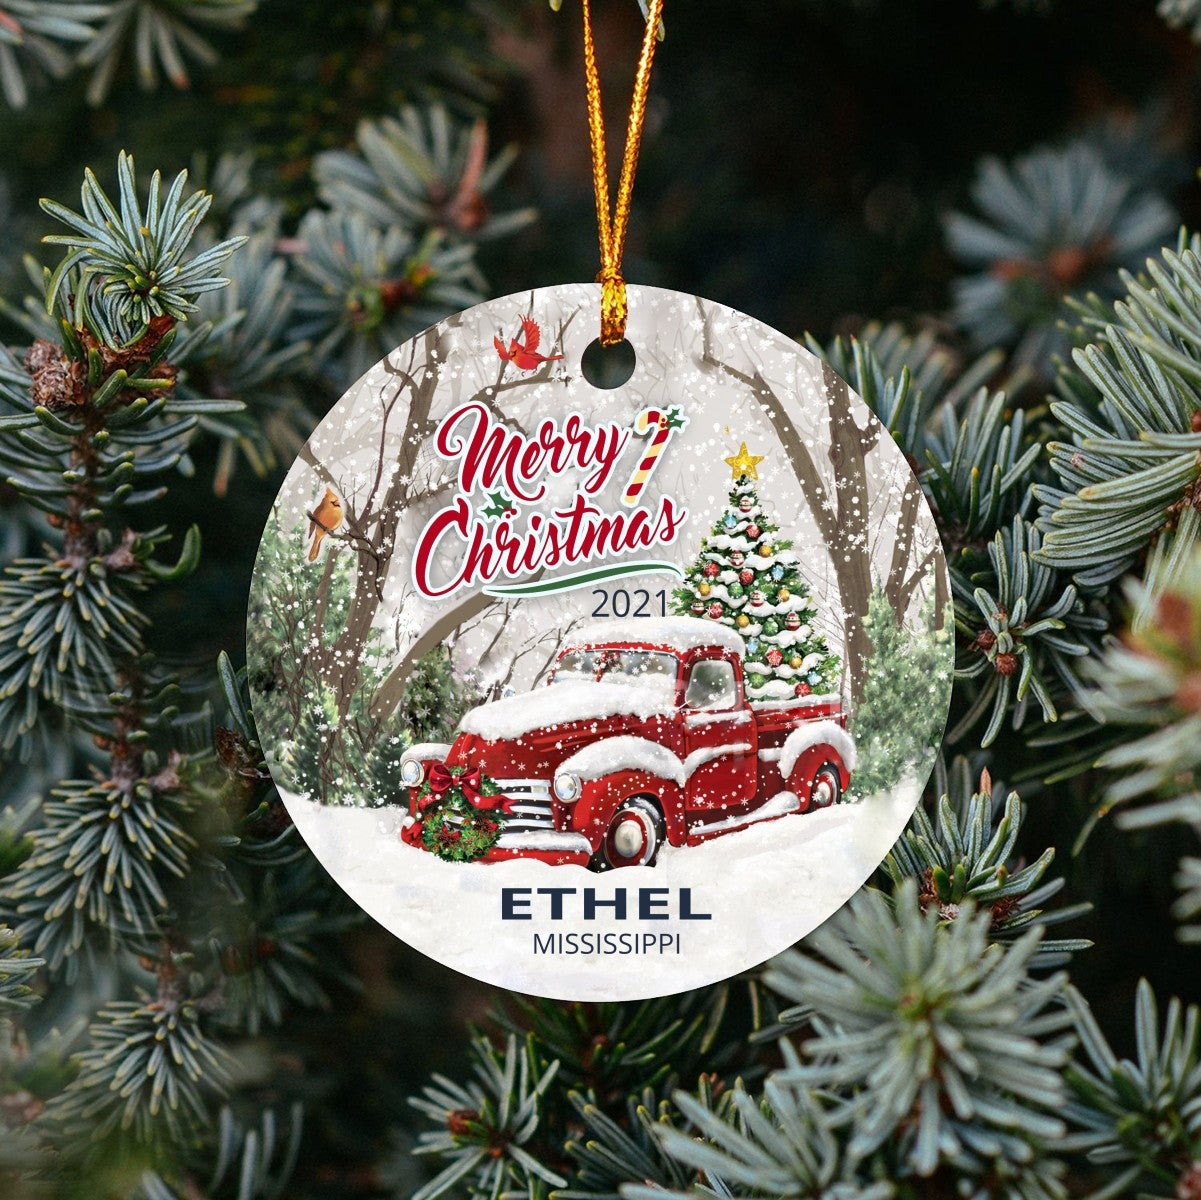 Christmas Tree Ornaments Ethel - Ornament With Name City, State Ethel Mississippi MS Ornament - Red Truck Xmas Ornaments 3'' Plastic Gift For Family, Friend And Housewarming